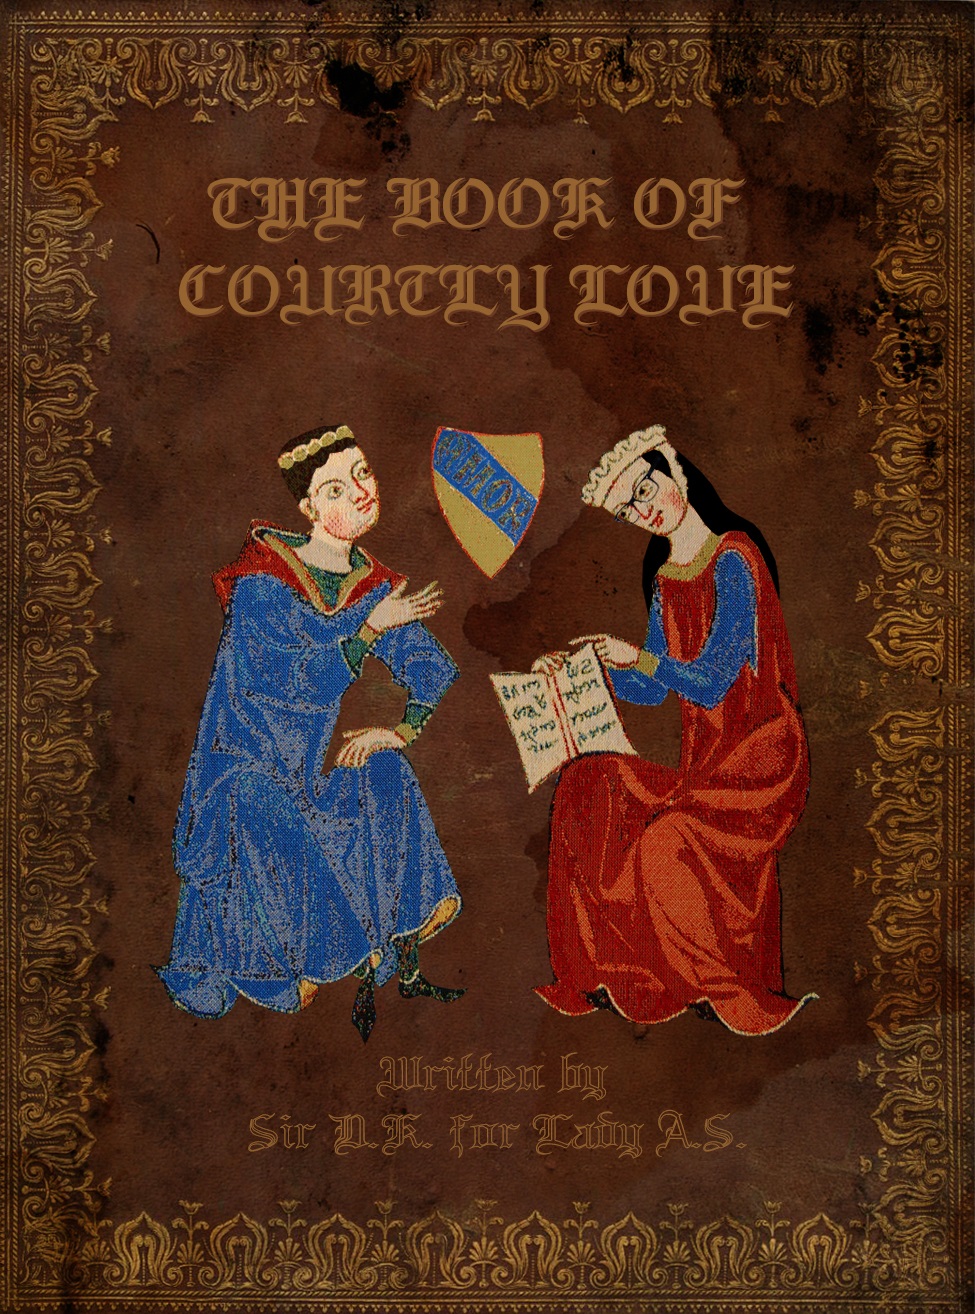 Medieval book cover